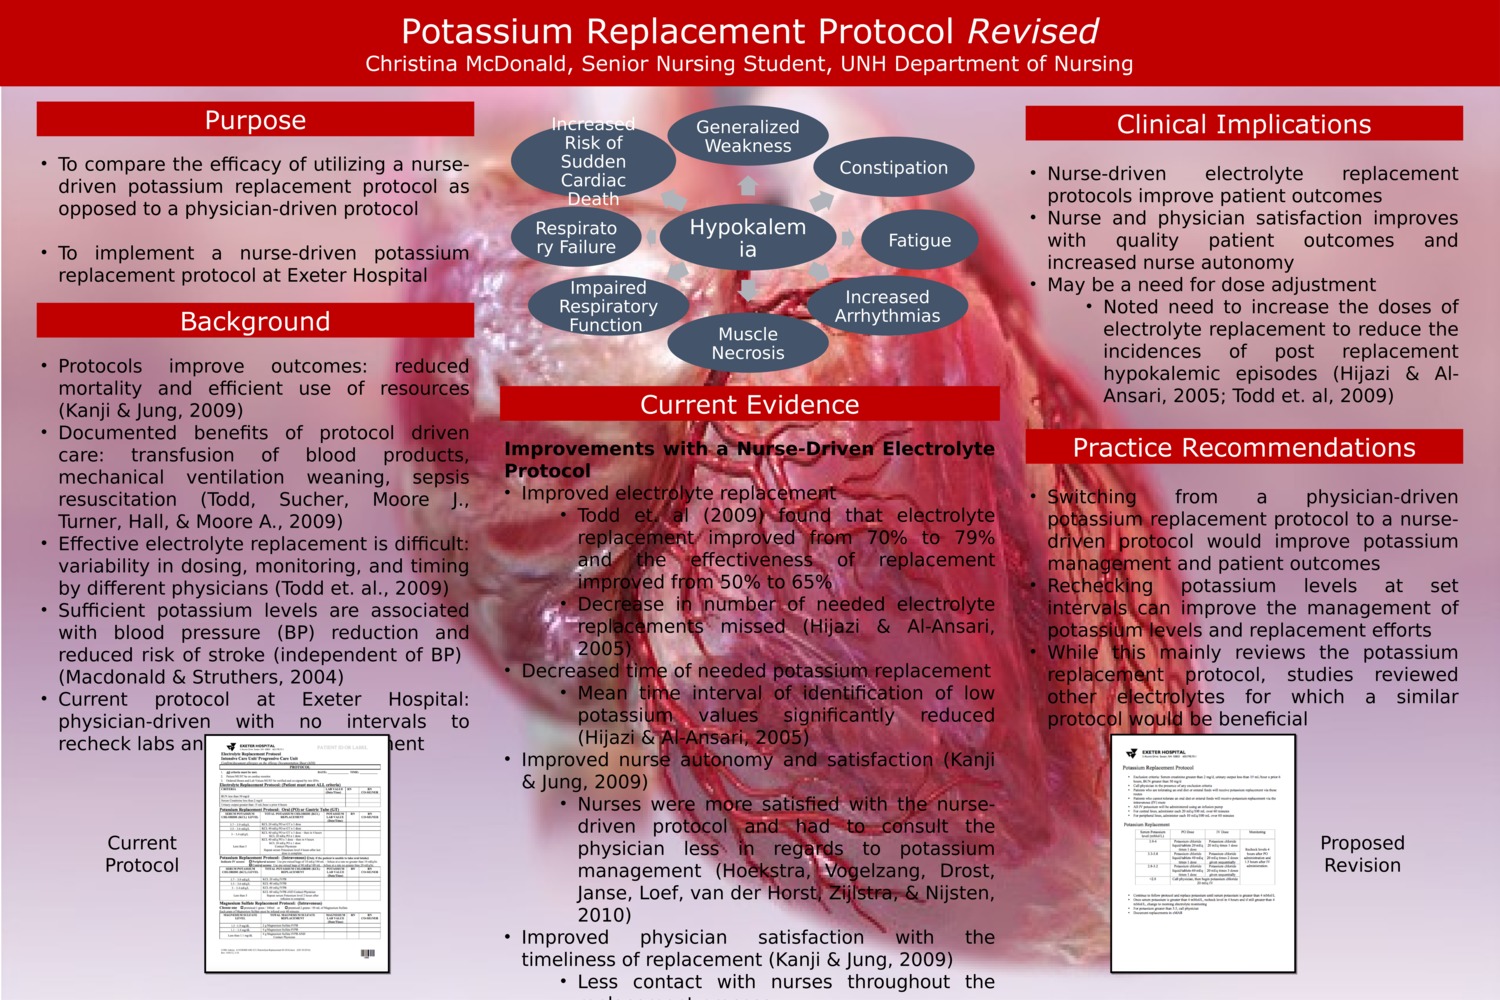 Potassium Replacement Protocol Revised by cam2005